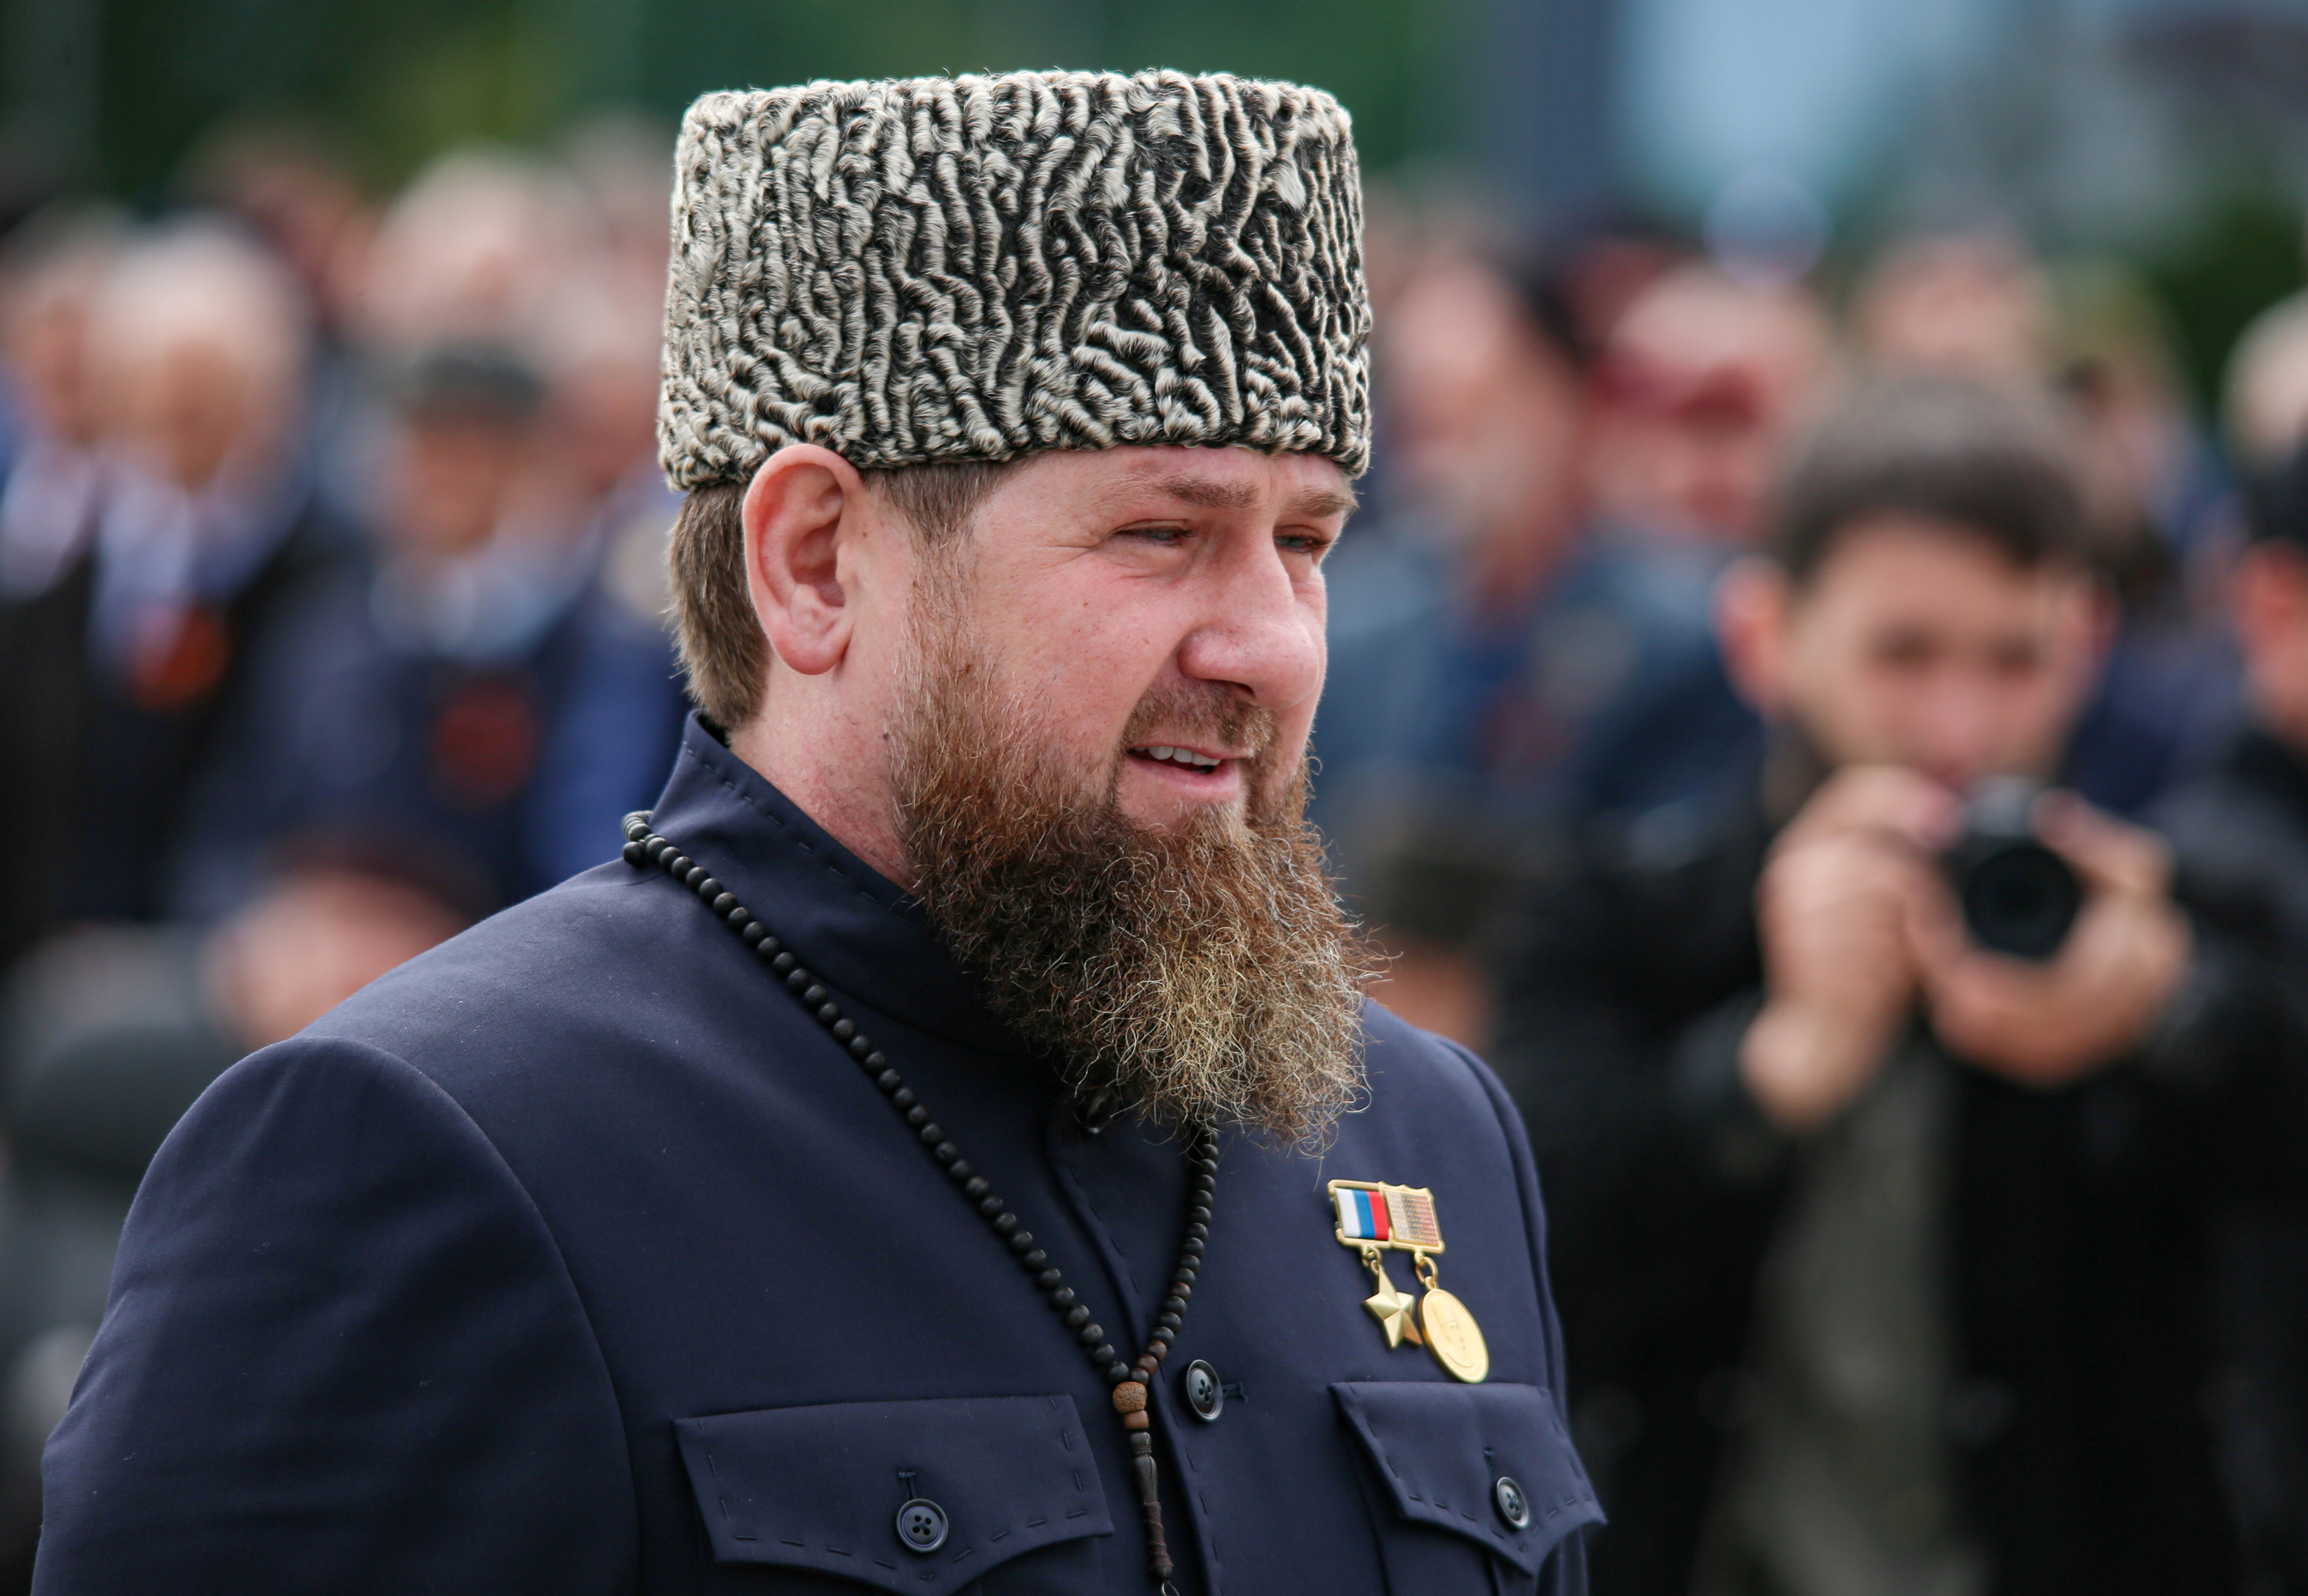 Head of the Chechen Republic Ramzan Kadyrov attends a military parade on Victory Day, which marks the 77th anniversary of the victory over Nazi Germany in World War Two, at the Chechen capital Grozny, in Russia on May 9, 2022.